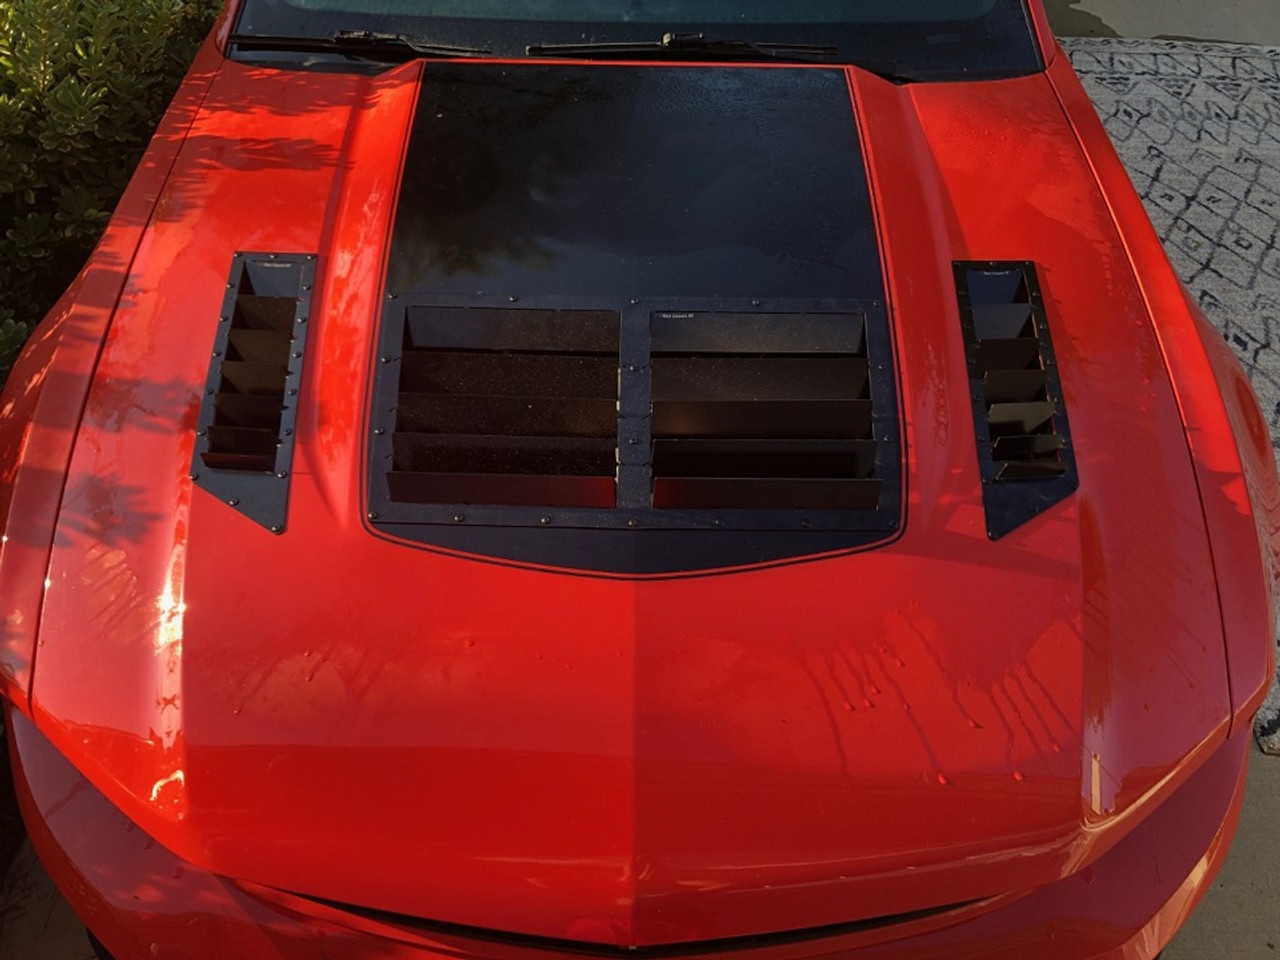 Race Louver Mustang RT Track Trim center car hood extractor is designed for street, high performance driving and track duty